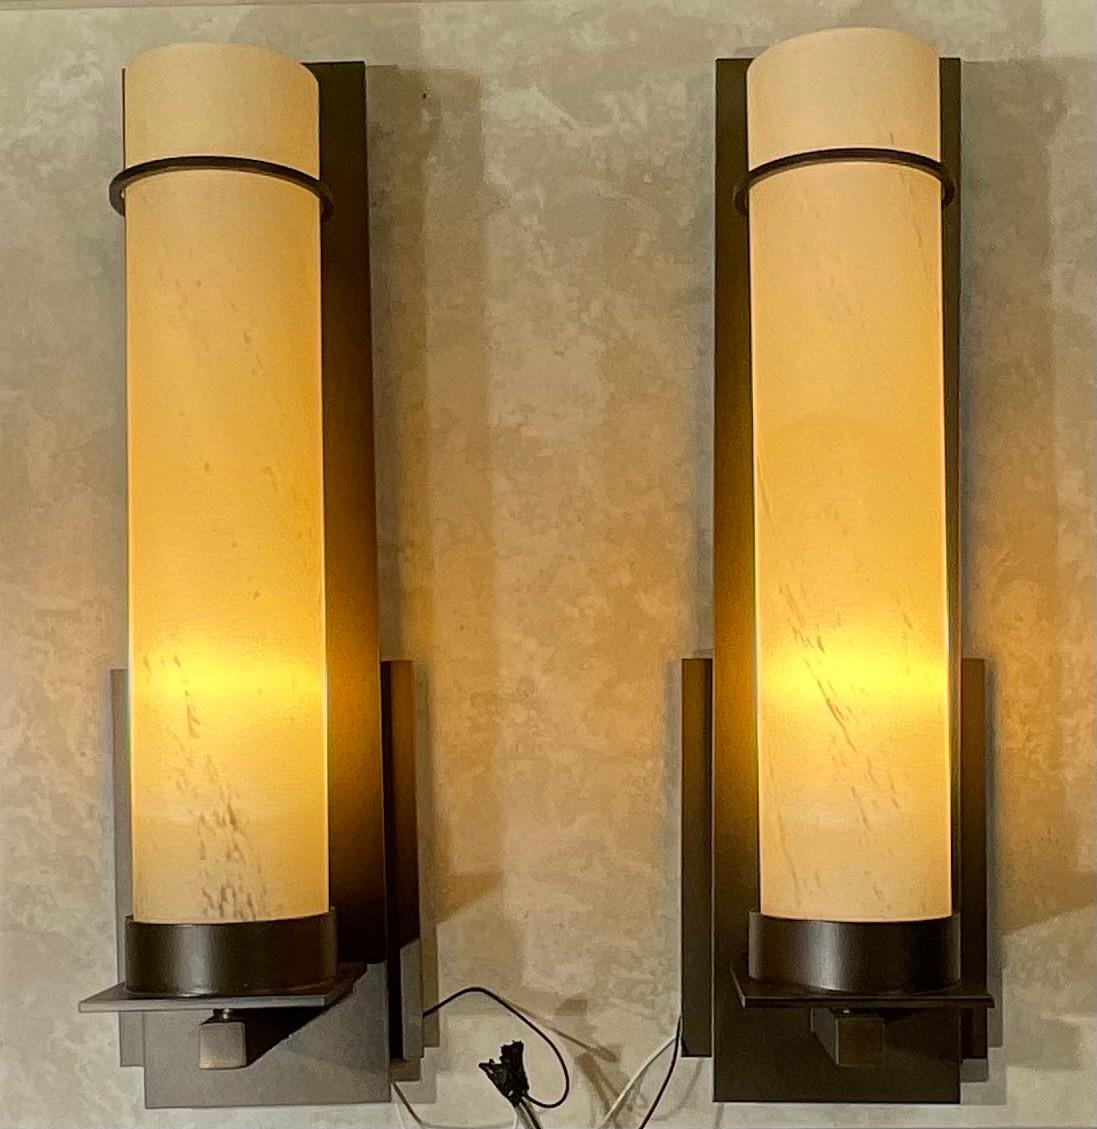 Beautiful pair of after hours sconces made of sculpted metal dark smoke finish , with long narrow art glass marblize look tube . One 60/watt light each, providing visual interest .
Made in the USA

ULCUL listed 